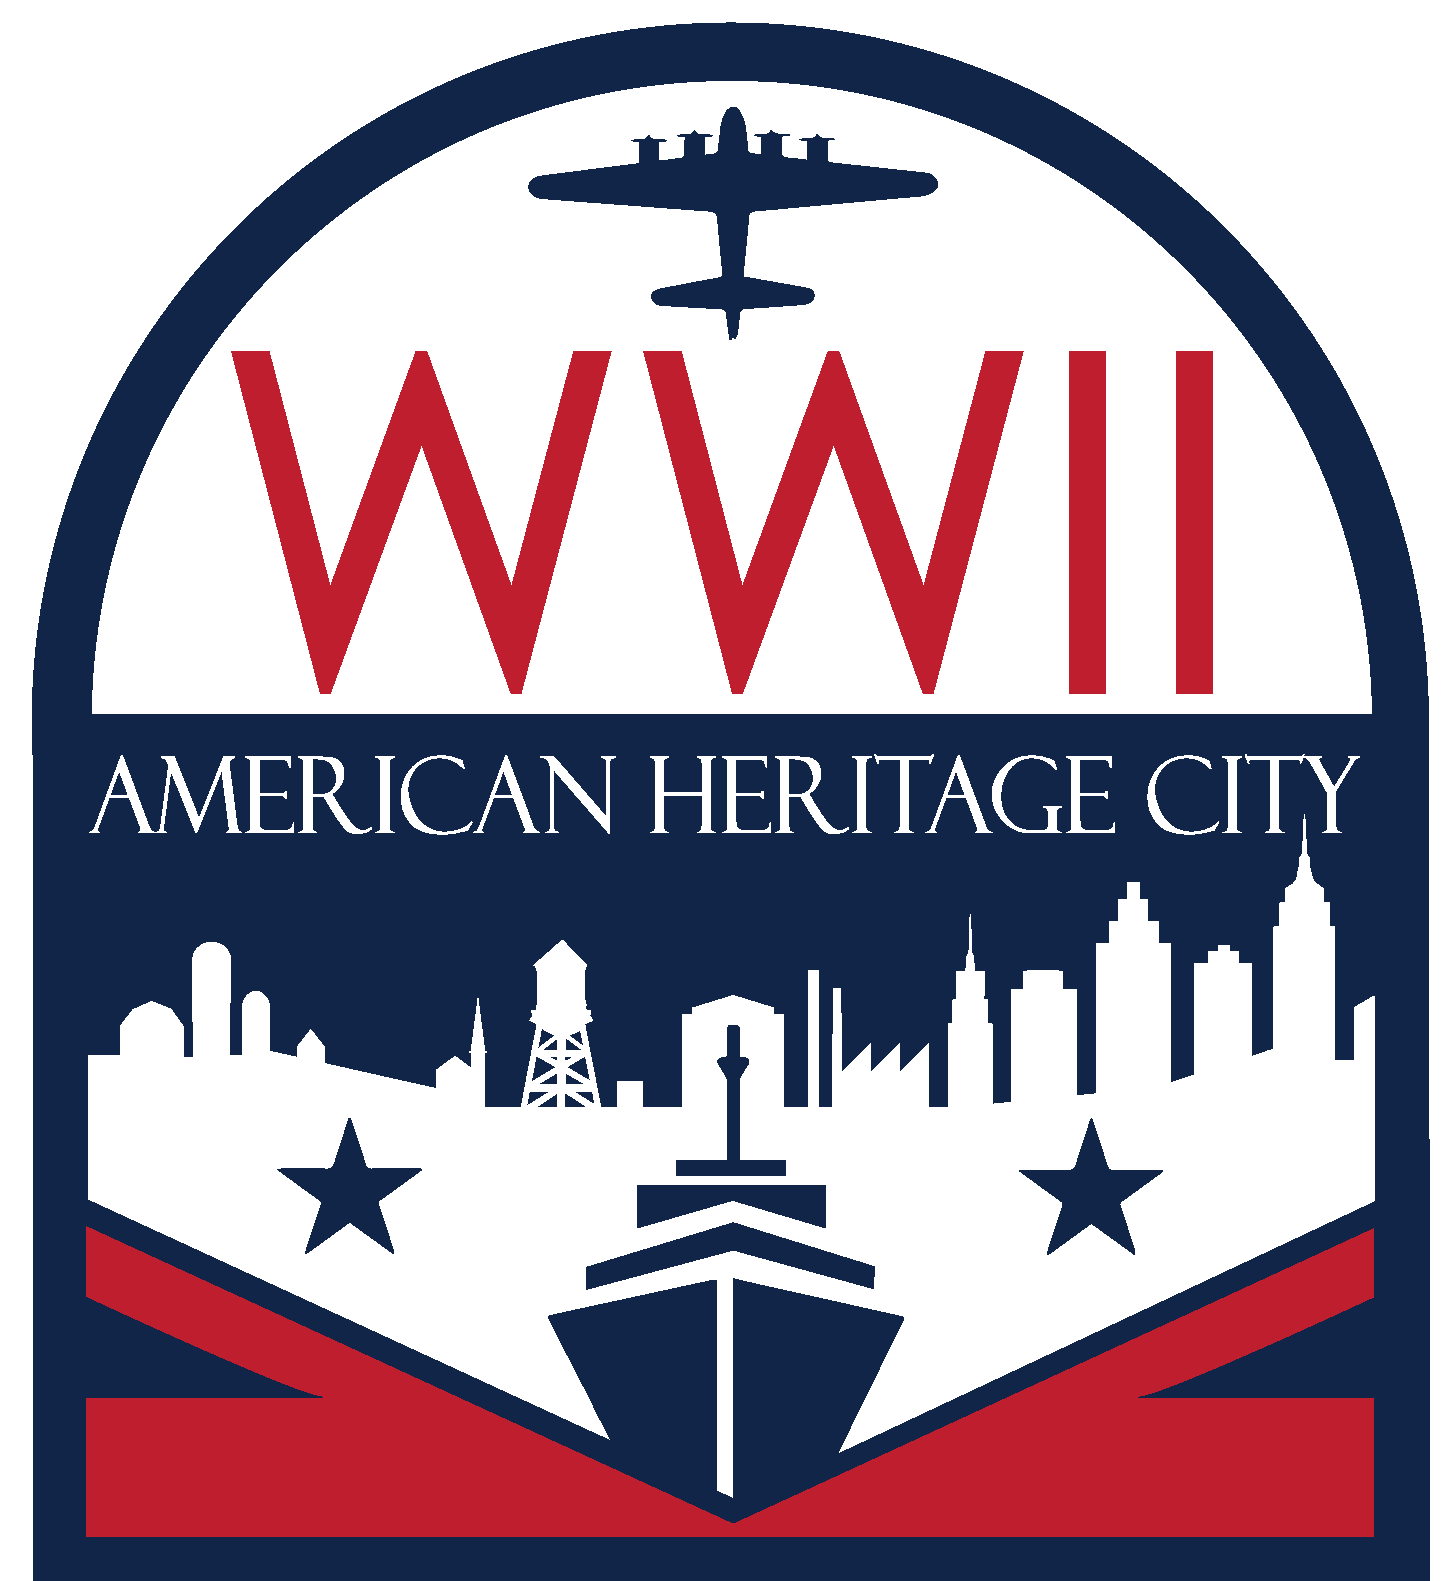 Graphic of WWII American Heritage City